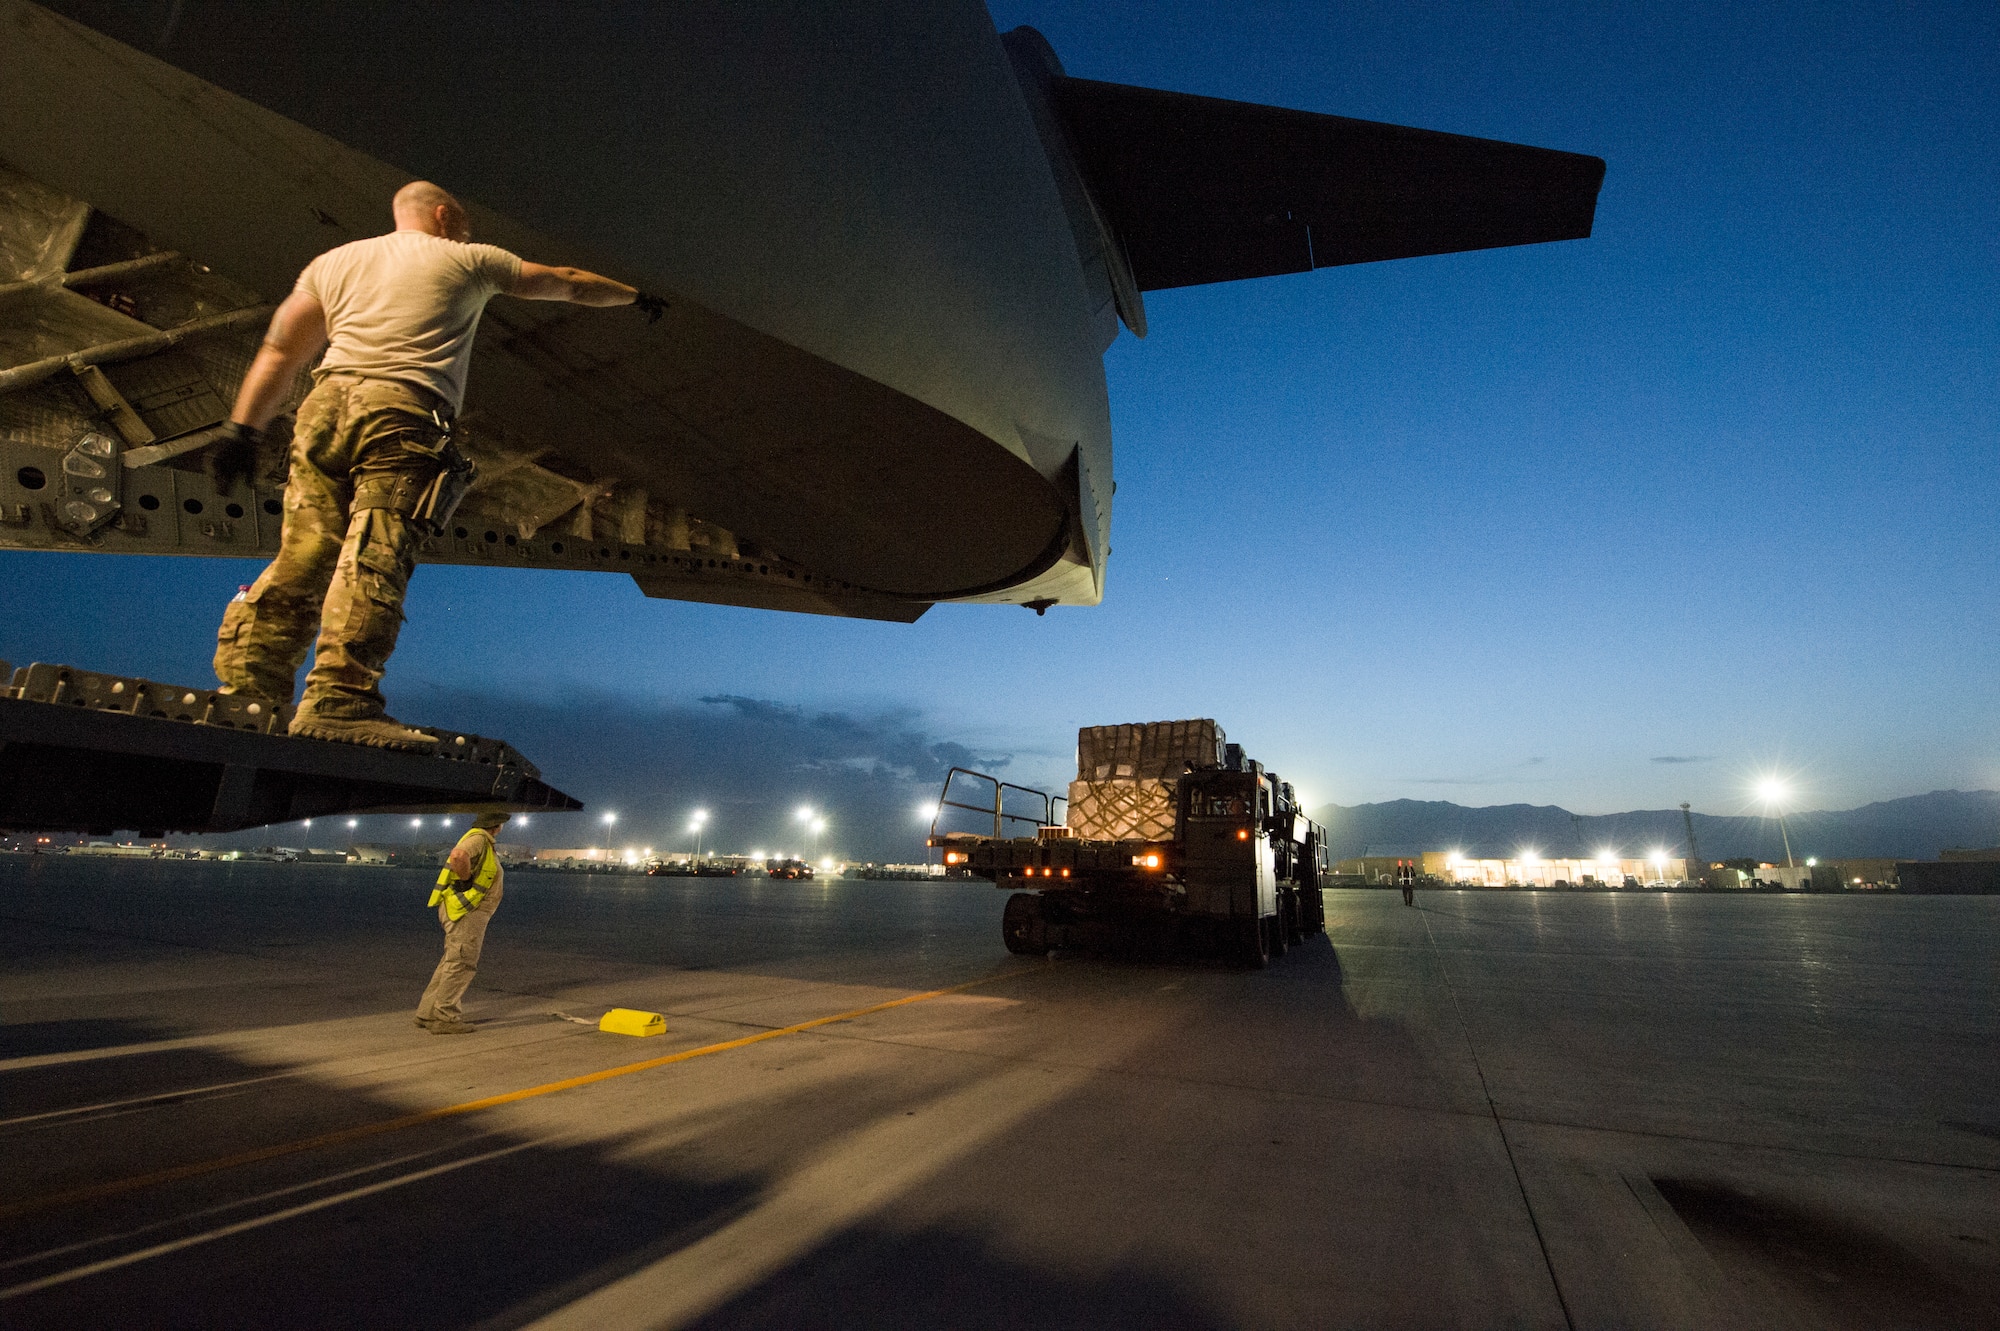 U.S. Air Force Senior Airman Jeremy Kosick, 816th Expeditionary Airlift Squadron instructor loadmaster, guides a K-loader back after off loading cargo onto a C-17 Globemaster III before a airdrop mission at Bagram Airfield, May 10, 2018. The C-17 transported troops and cargo to forward operating locations throughout the U.S. Central Command area of responsibility in support of Operation Freedom Sentinel mission. The C-17 is not only proficient in transporting troops and supplies, but can also perform tactical airlift and airdrop missions and transport ambulatory patients during aeromedical evacuations. (U.S. Air Force photo by Staff Sgt. Keith James)